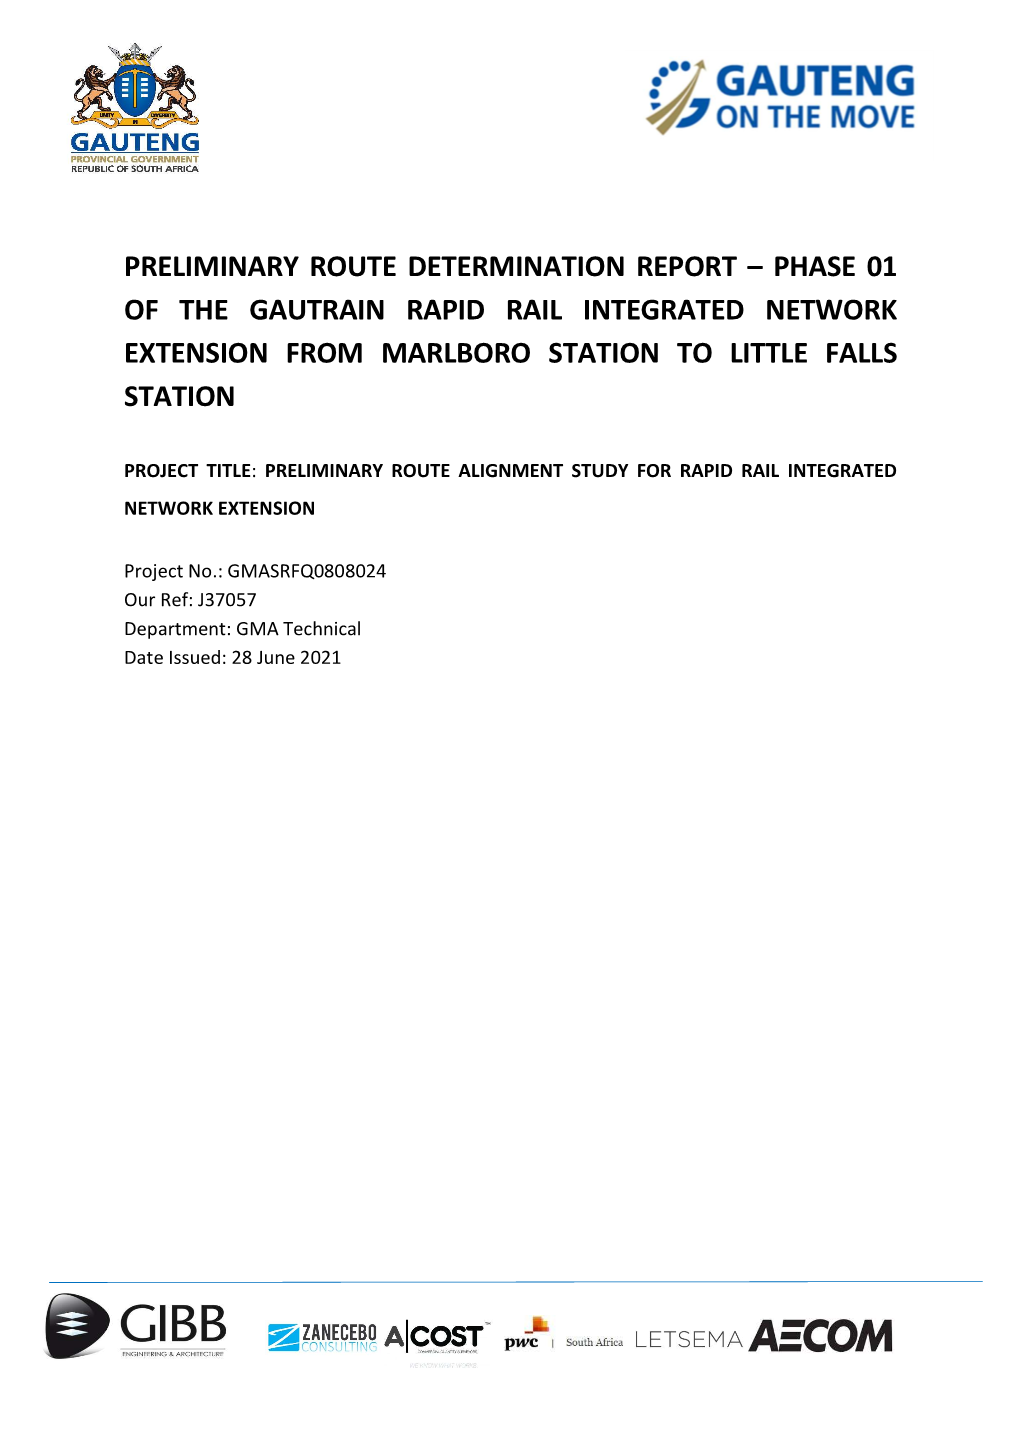 Preliminary Route Determination Report for Phase 1 of the GRRIN